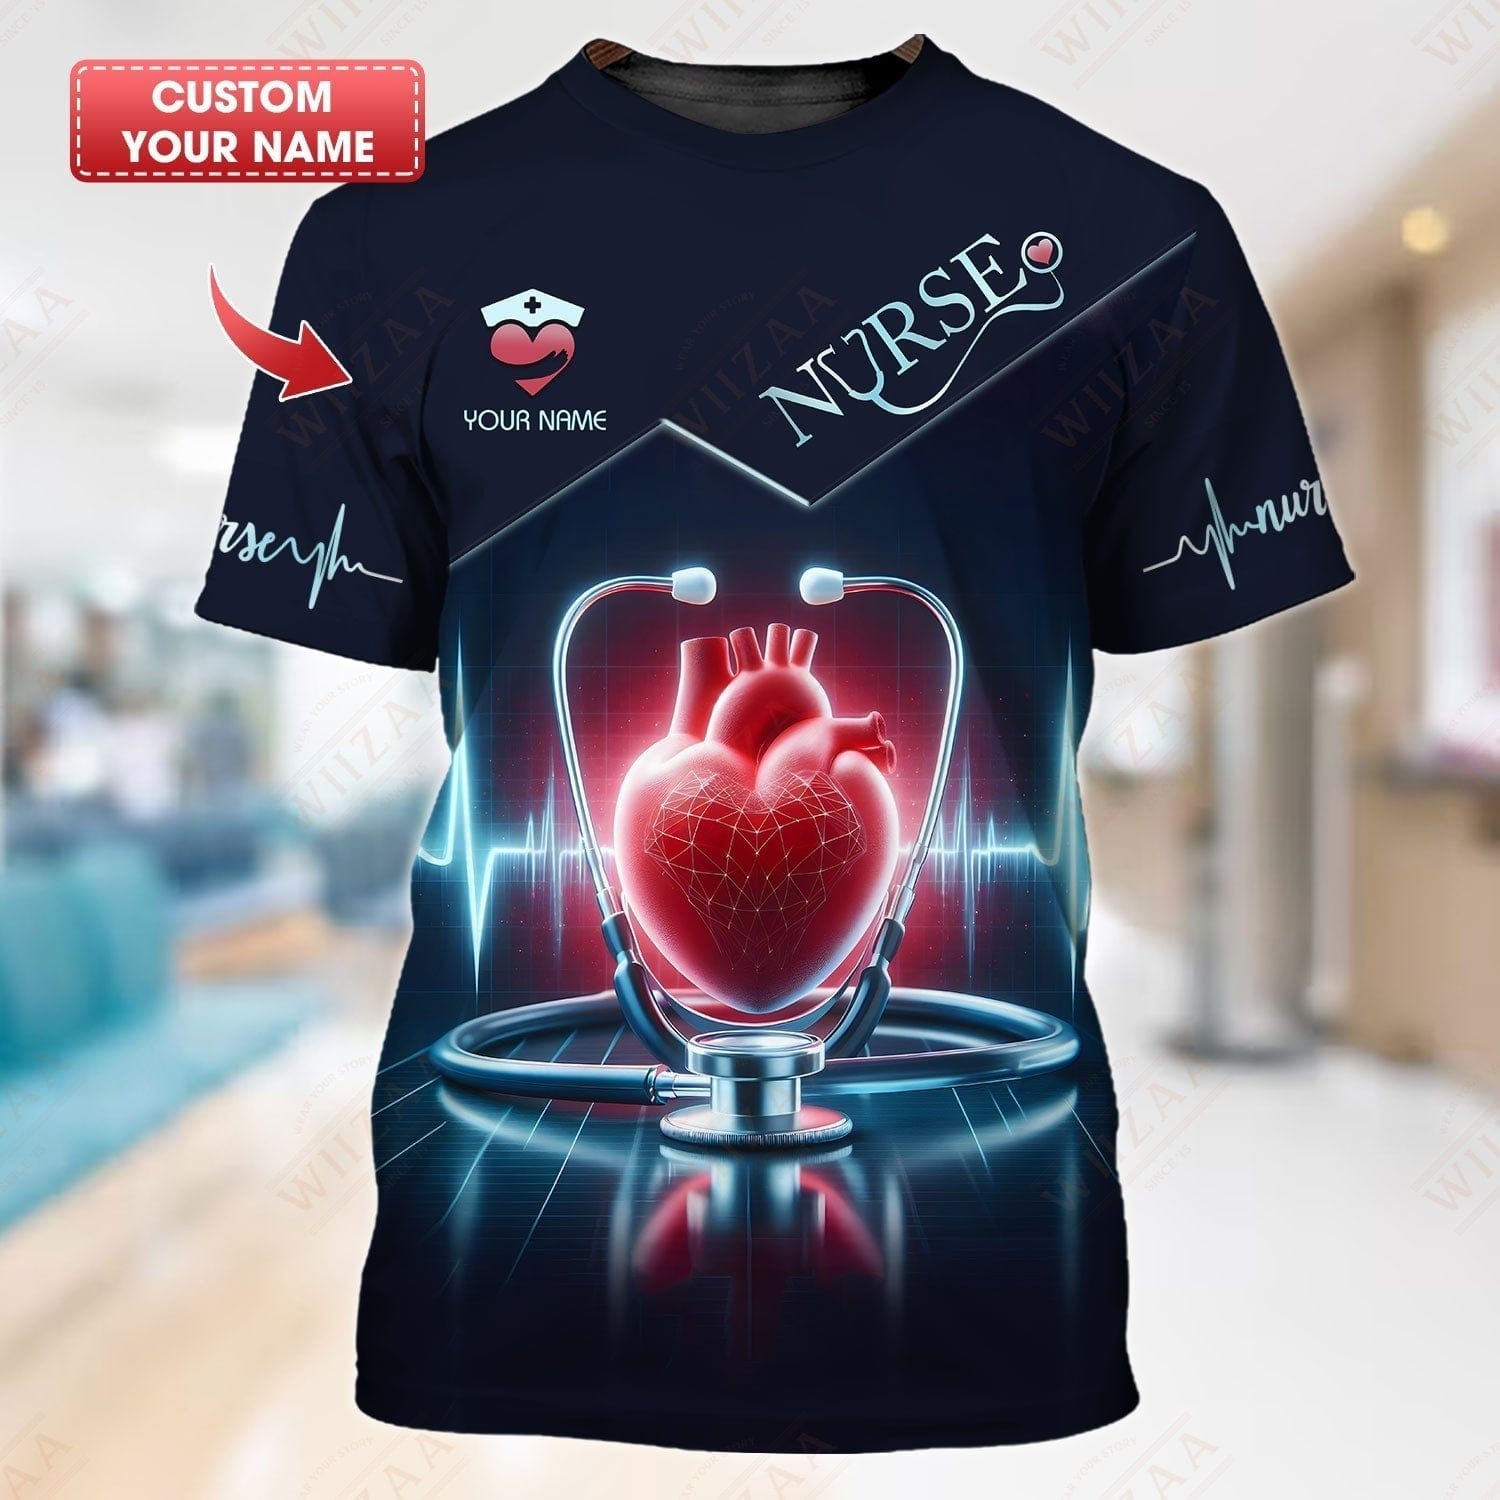 Personalized Nurse T-Shirt - EKG Line and Stethoscope Print | Relaxed Medical Apparel